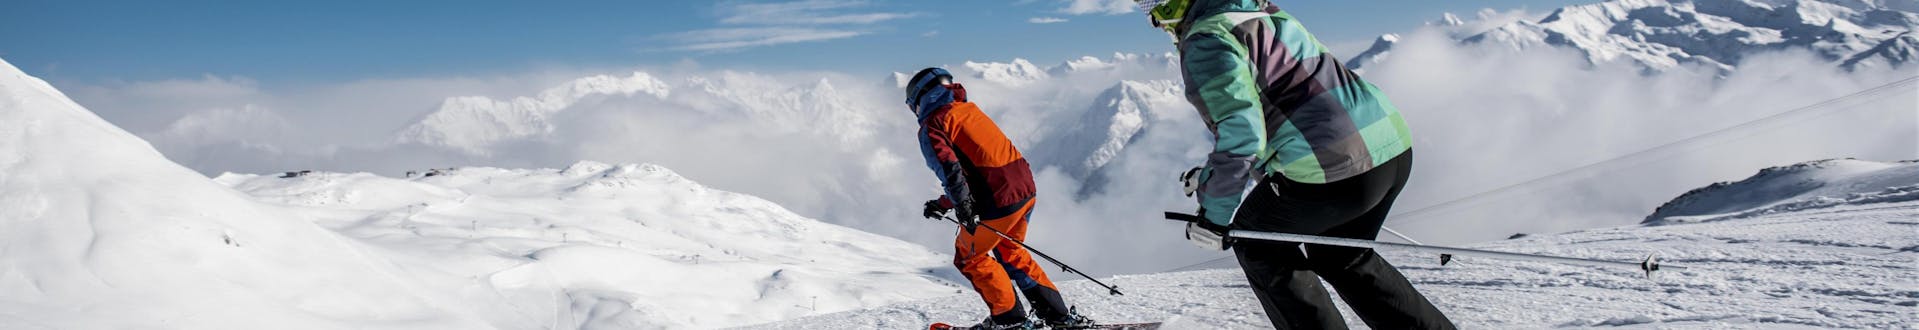 Two skiers are skiing down a freshly prepared slope in the Swiss ski resort of Klosters, a popular place to book ski lessons with one of the local ski schools.